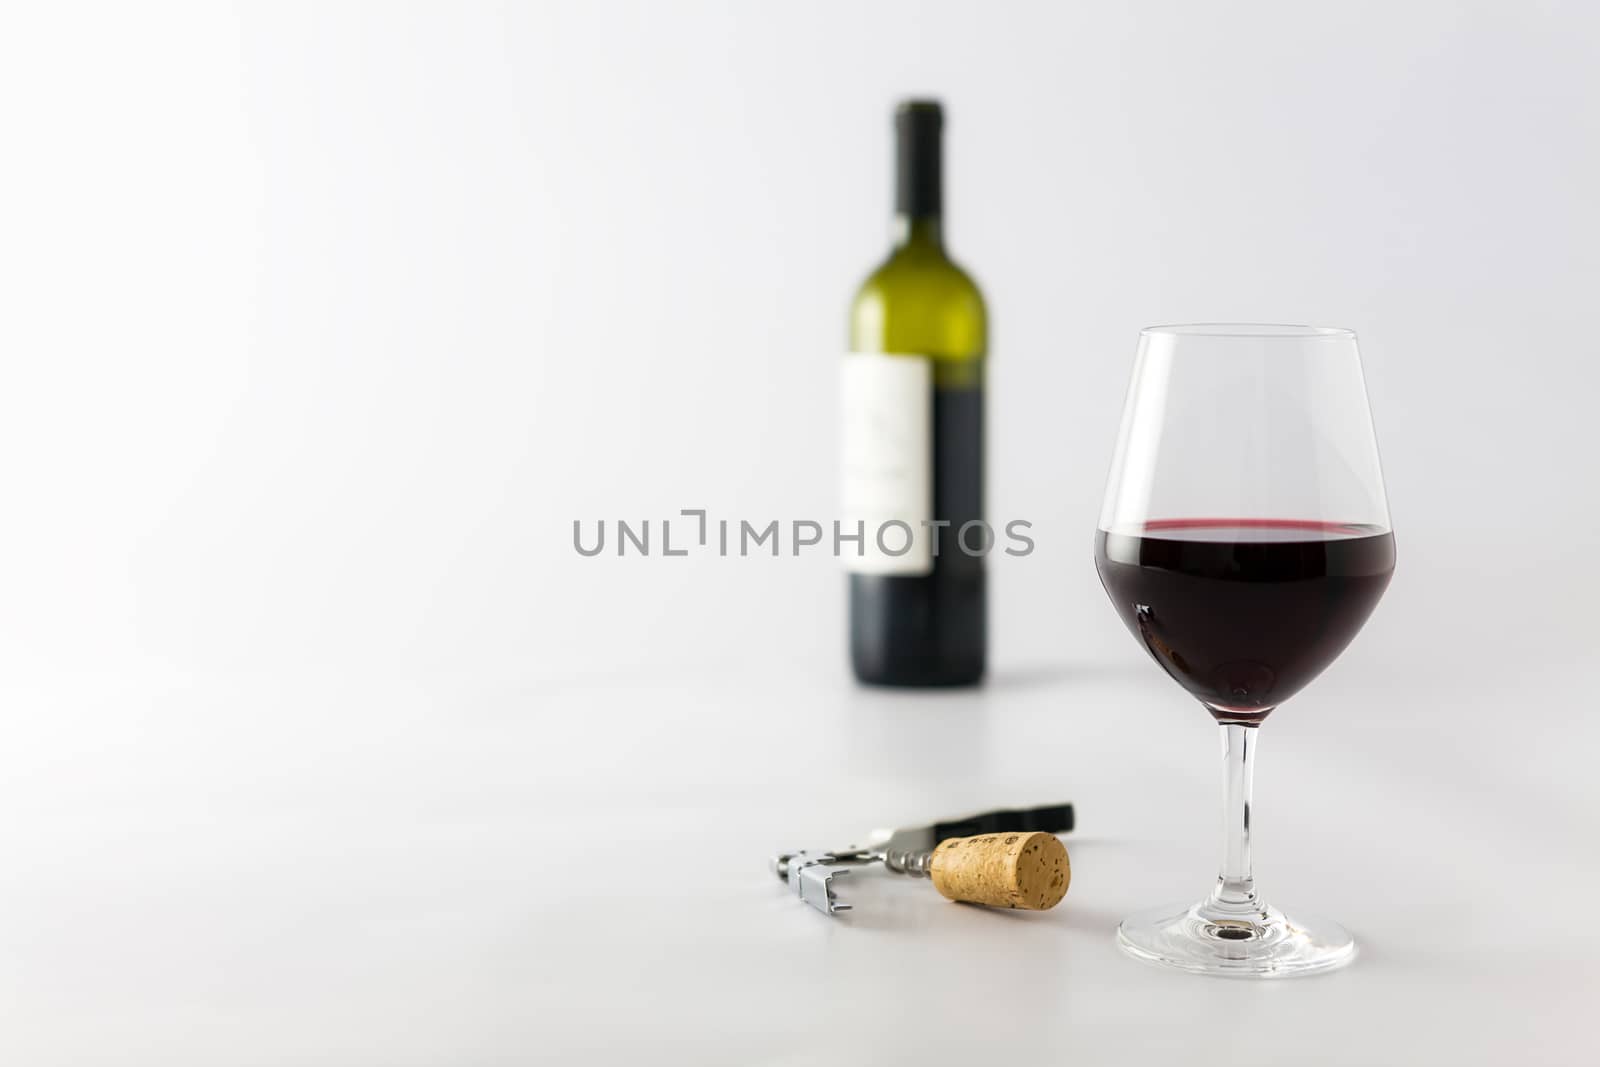 Glass of red wine and bottle on a white background with cork and corkscrew